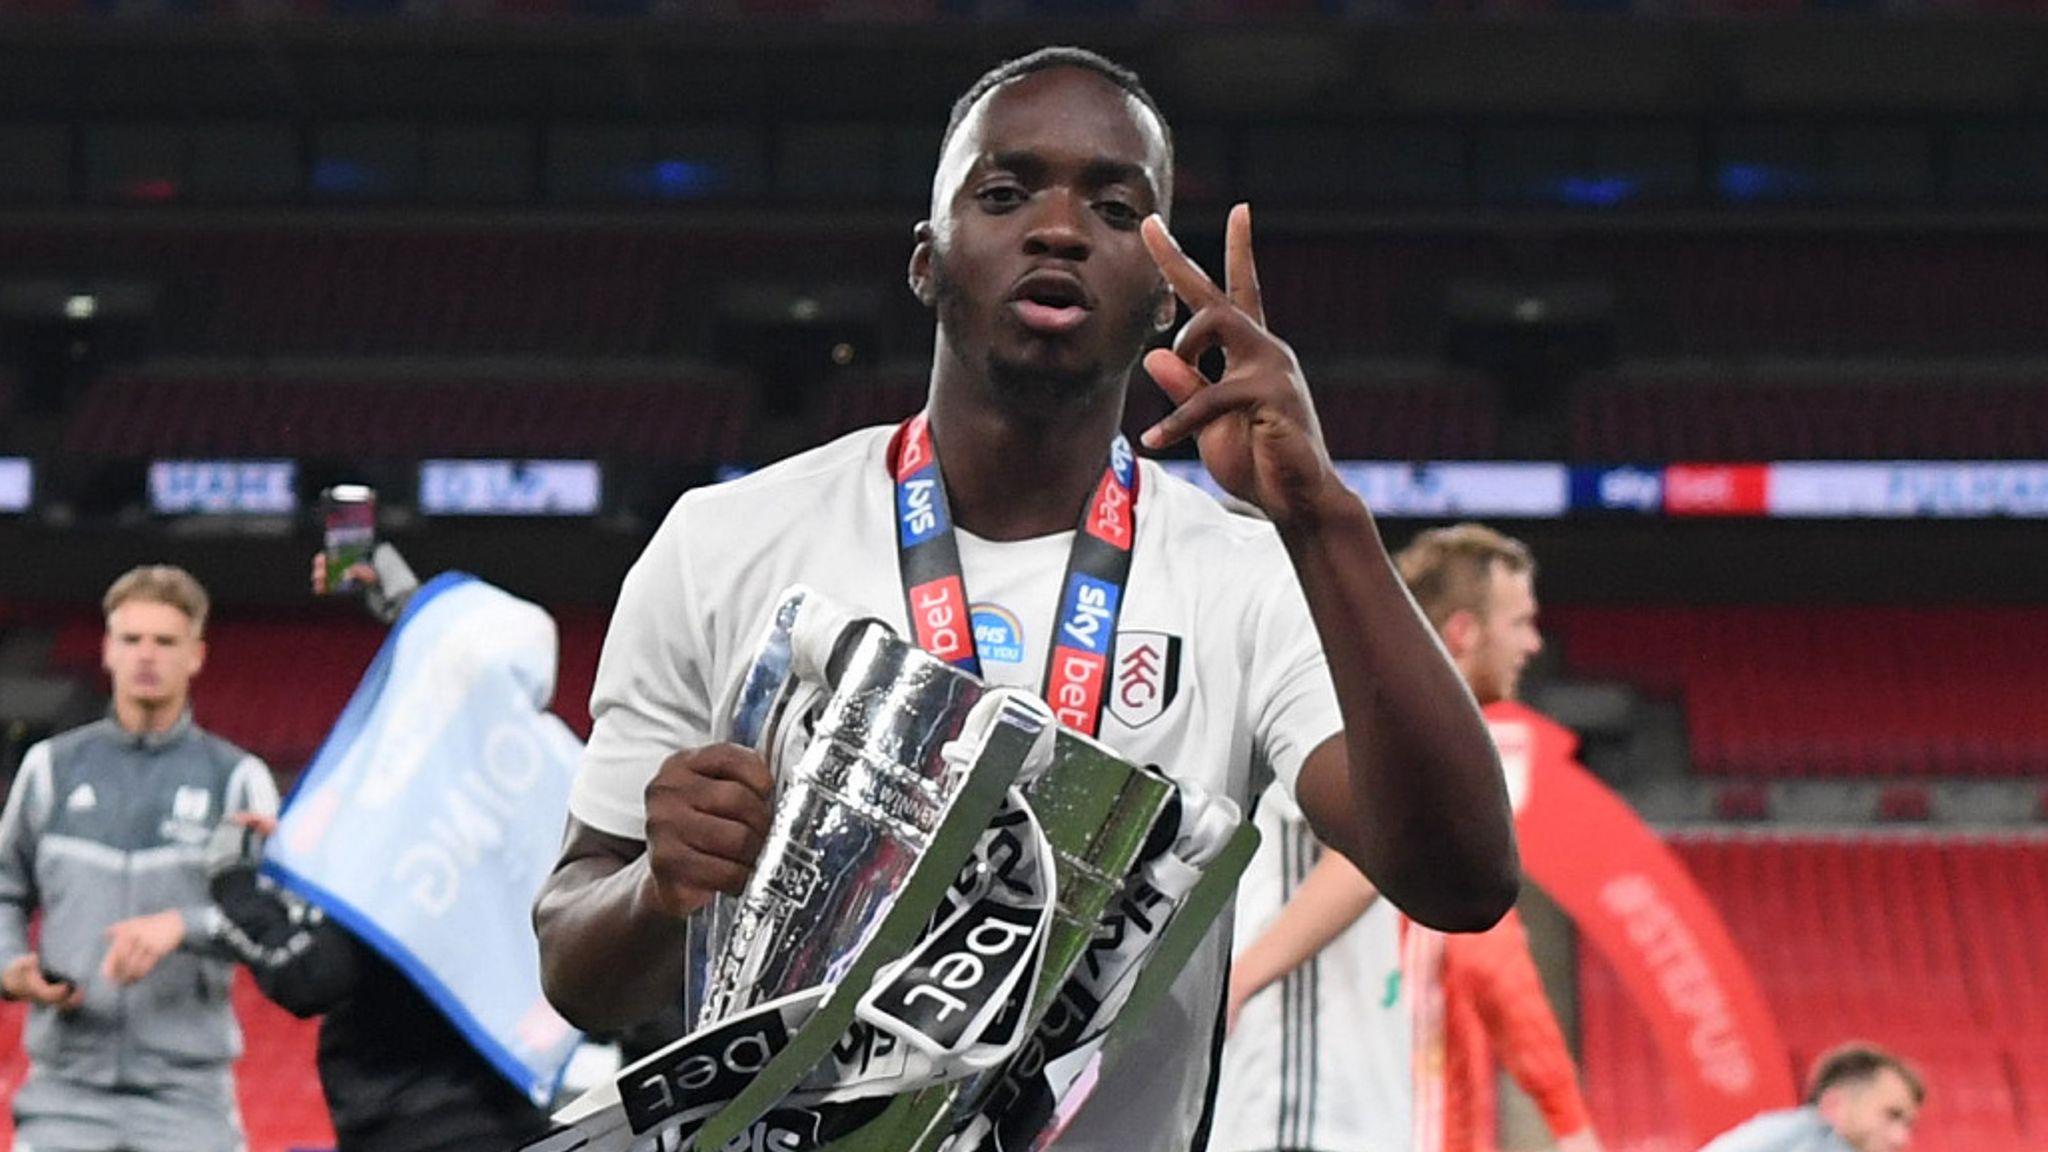 Neeskens Kebano Age, Salary, Net worth, Current Teams, Career, Height, and much more